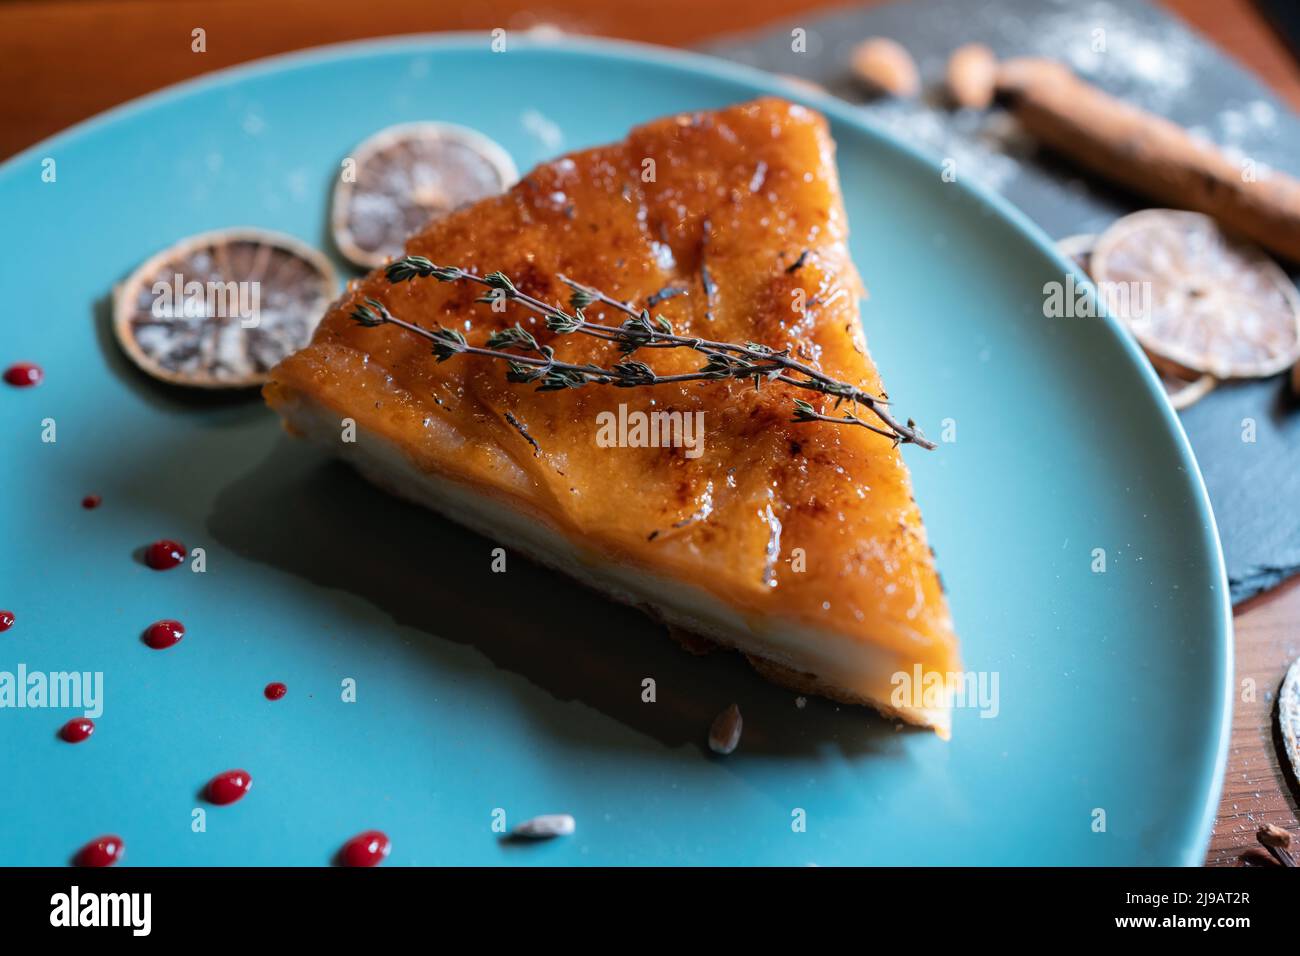 slicing fresh cheese or peer cake with mousse and cream and caramel crust Stock Photo